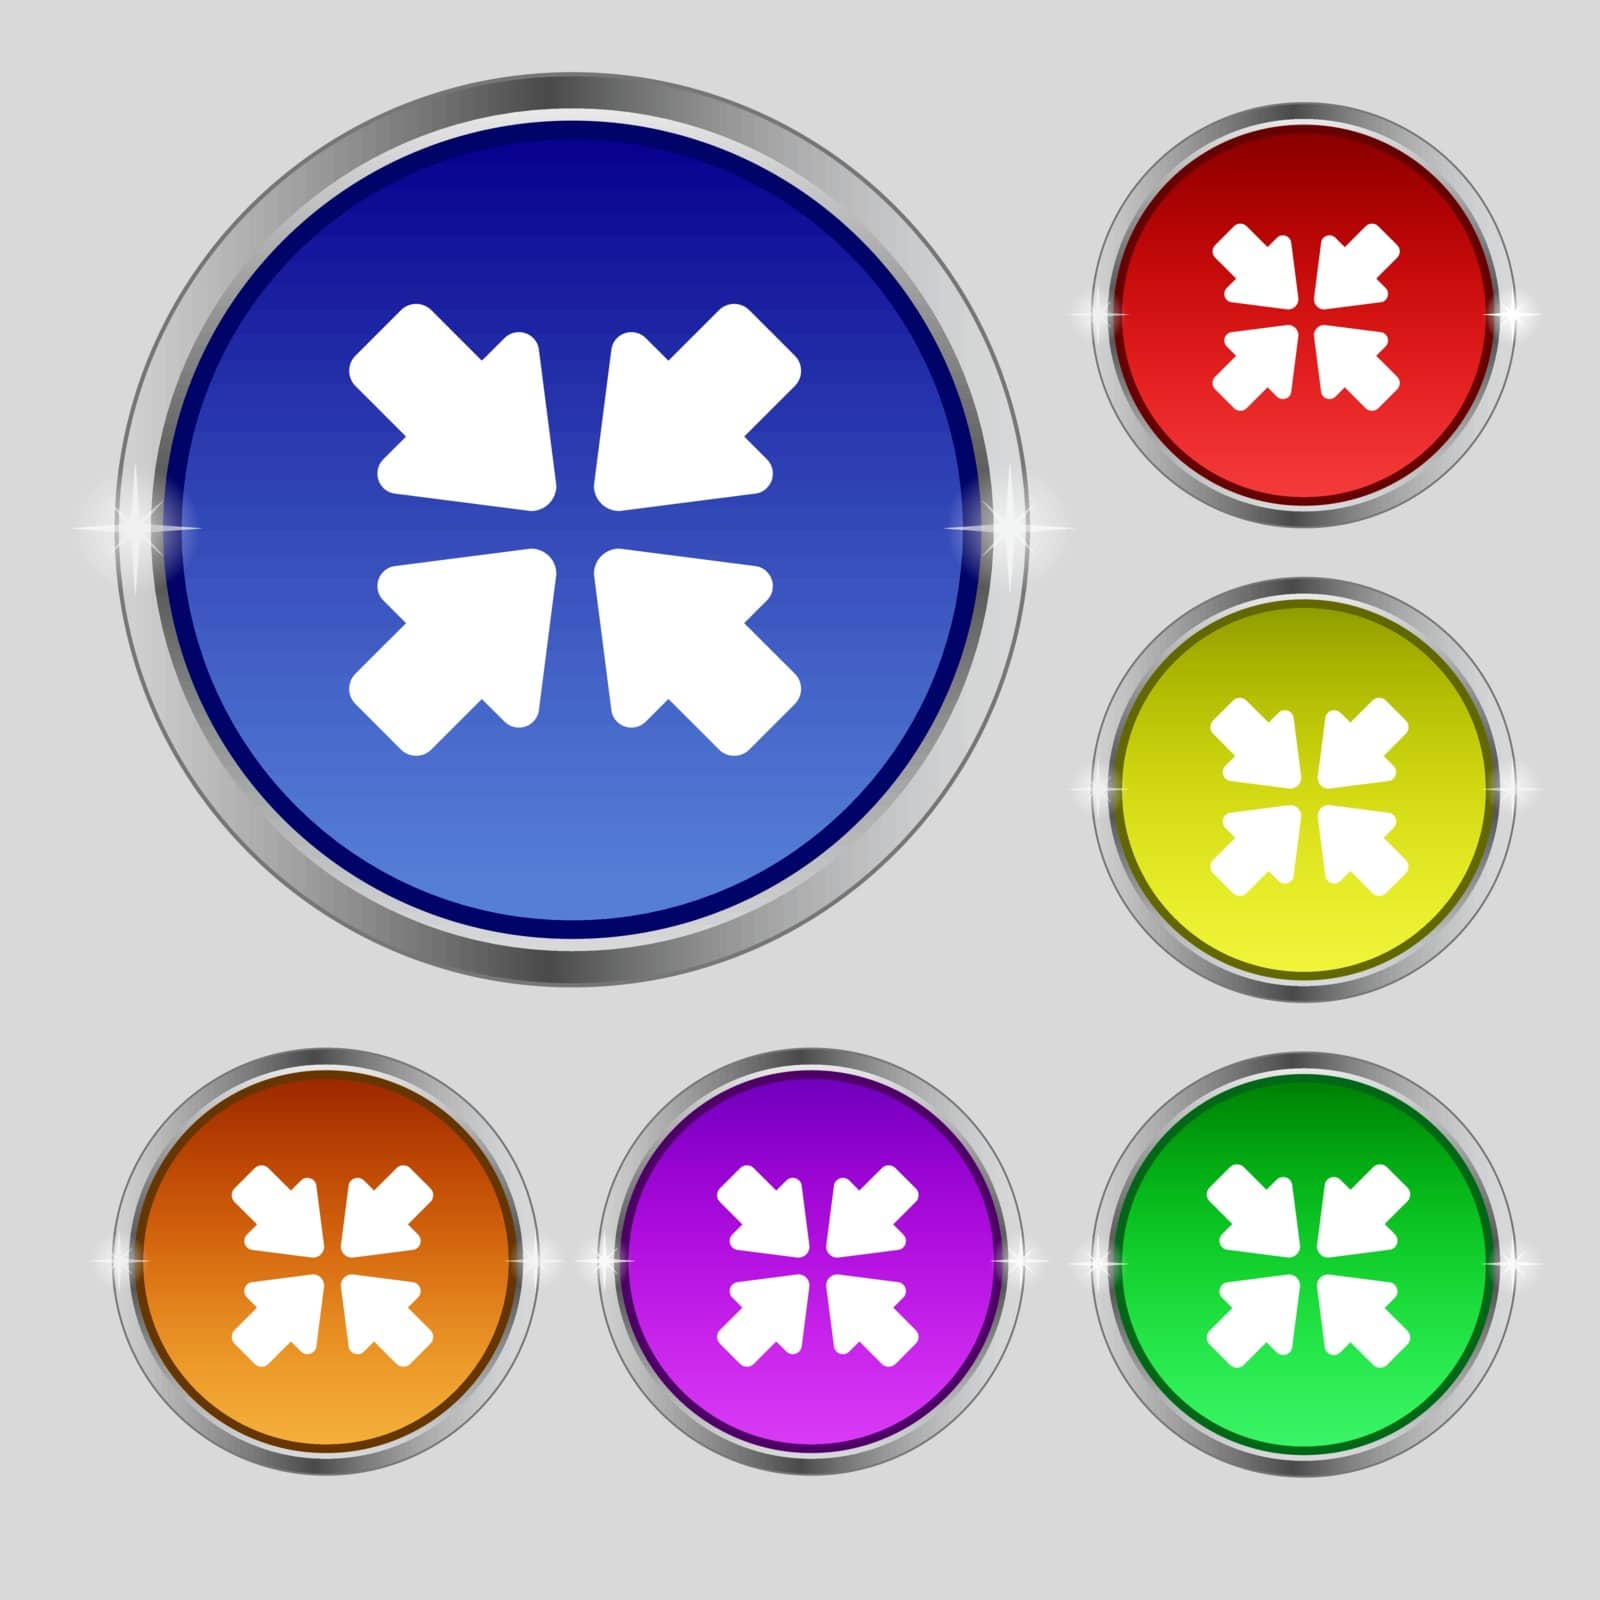 turn to full screen icon sign. Round symbol on bright colourful buttons. Vector illustration